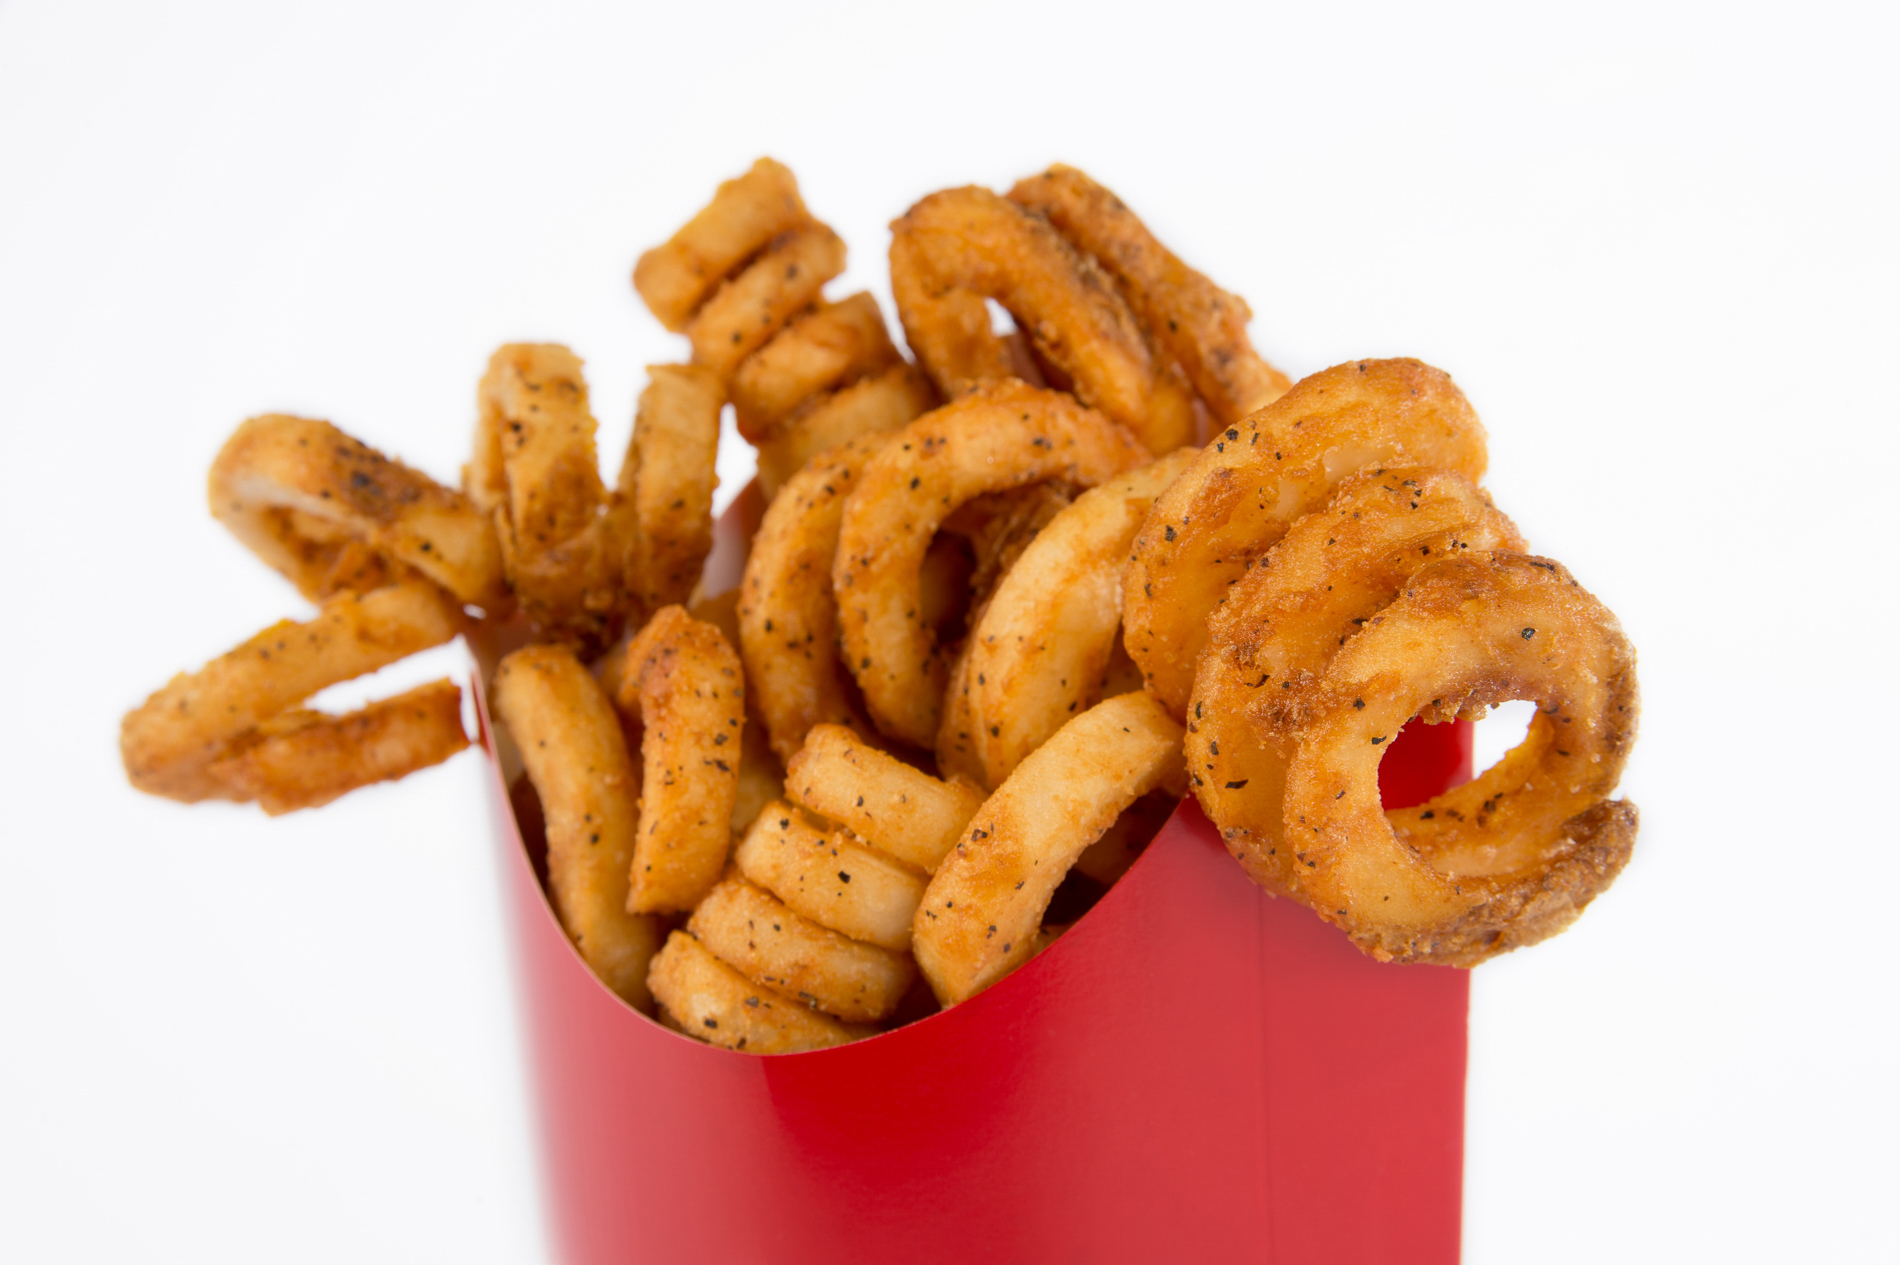 Curly Fries anyone?